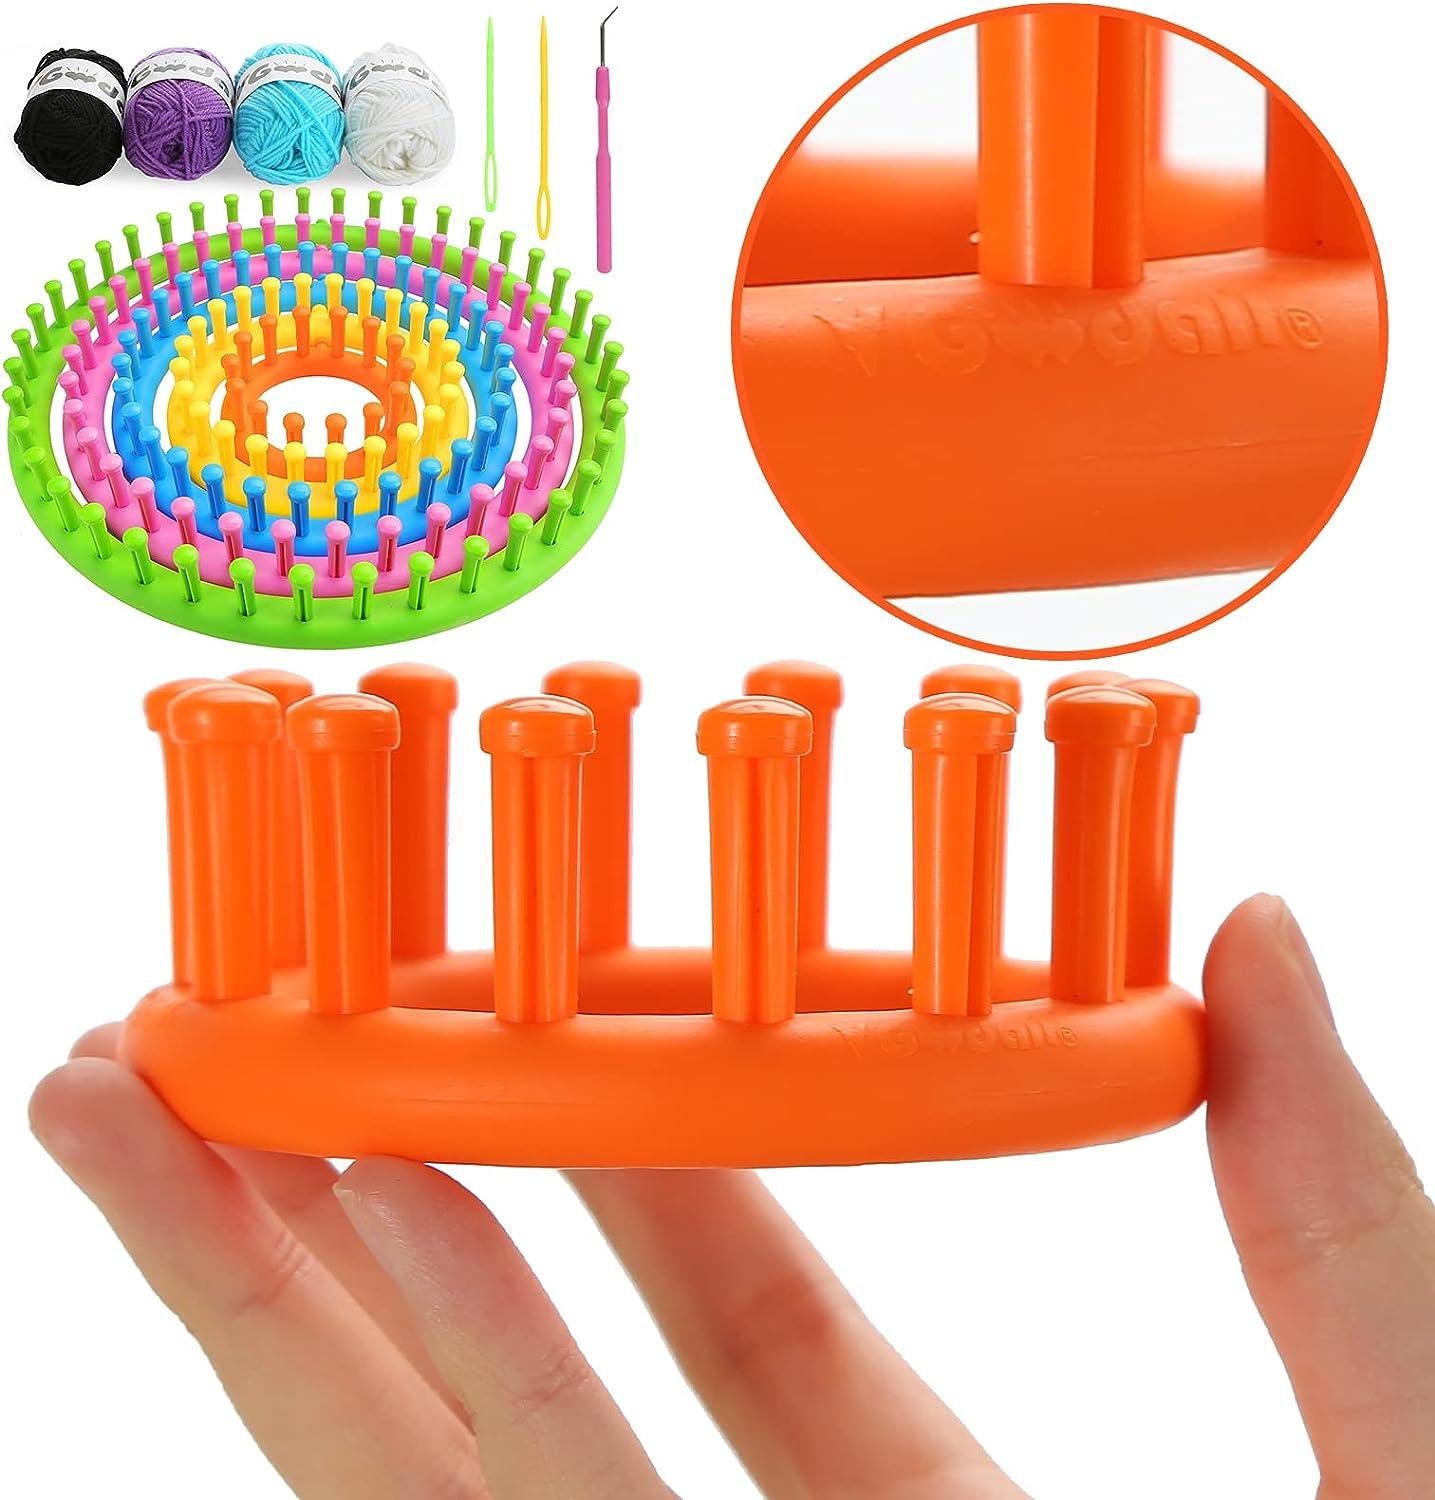 Round Knitting Loom Kit - 7 Pieces